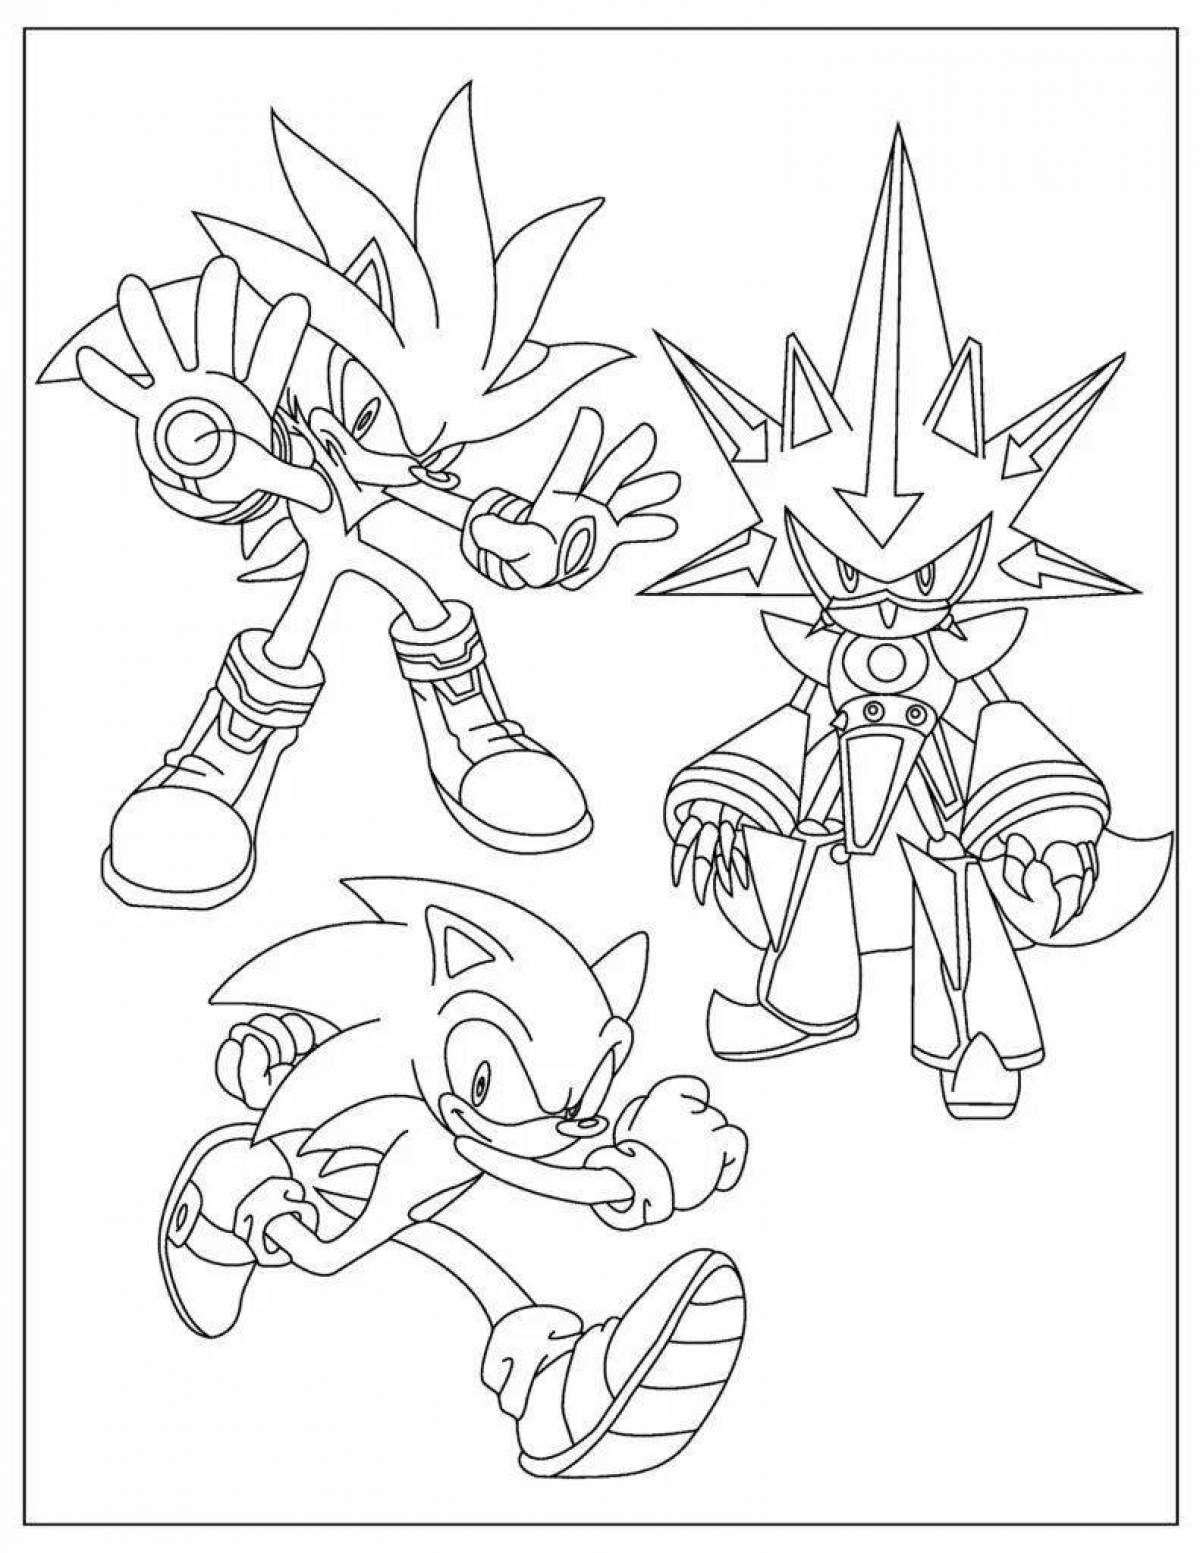 Attractive sonic virus coloring book